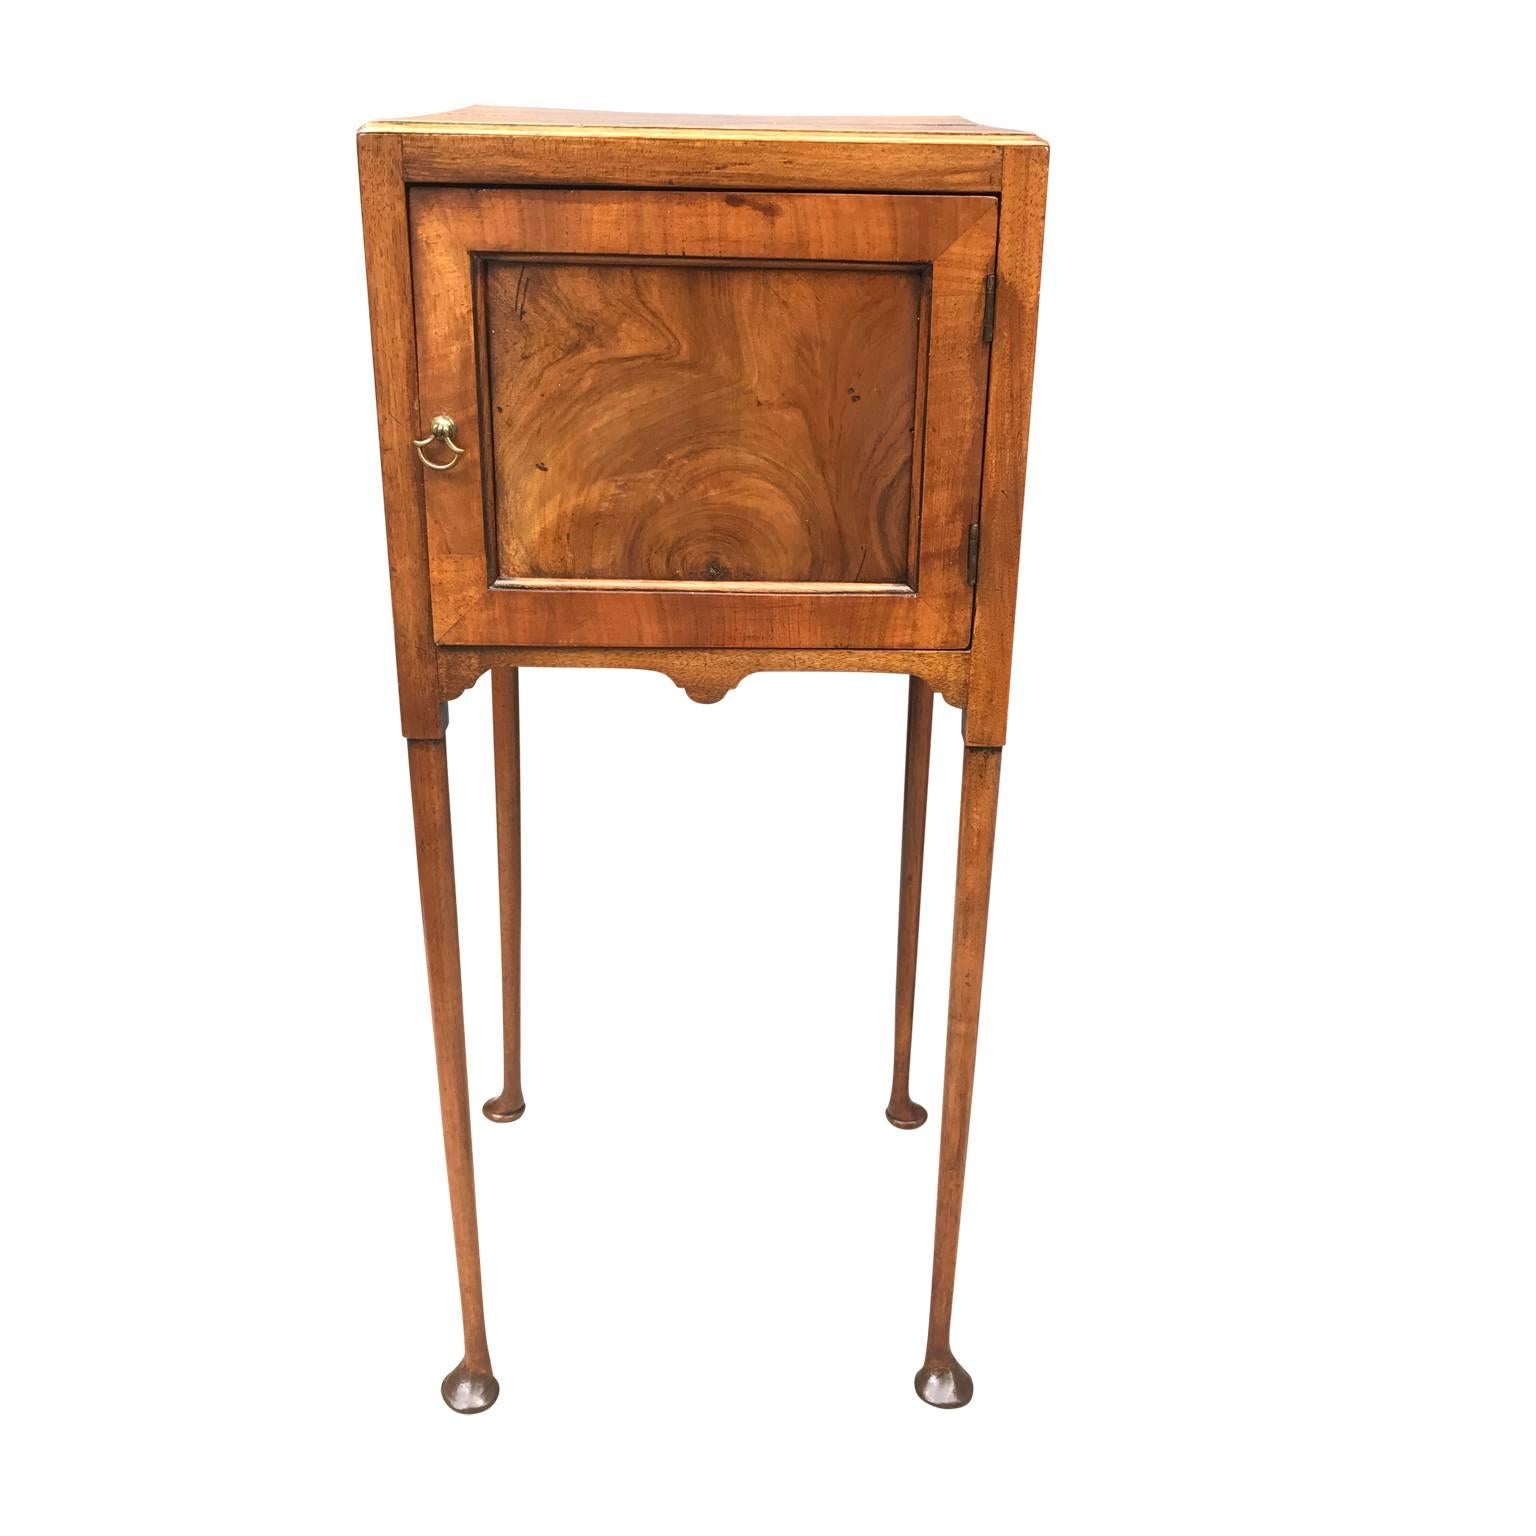 Small English Regency table with very skinny legs and square compartment. Door and side table in good working condition.